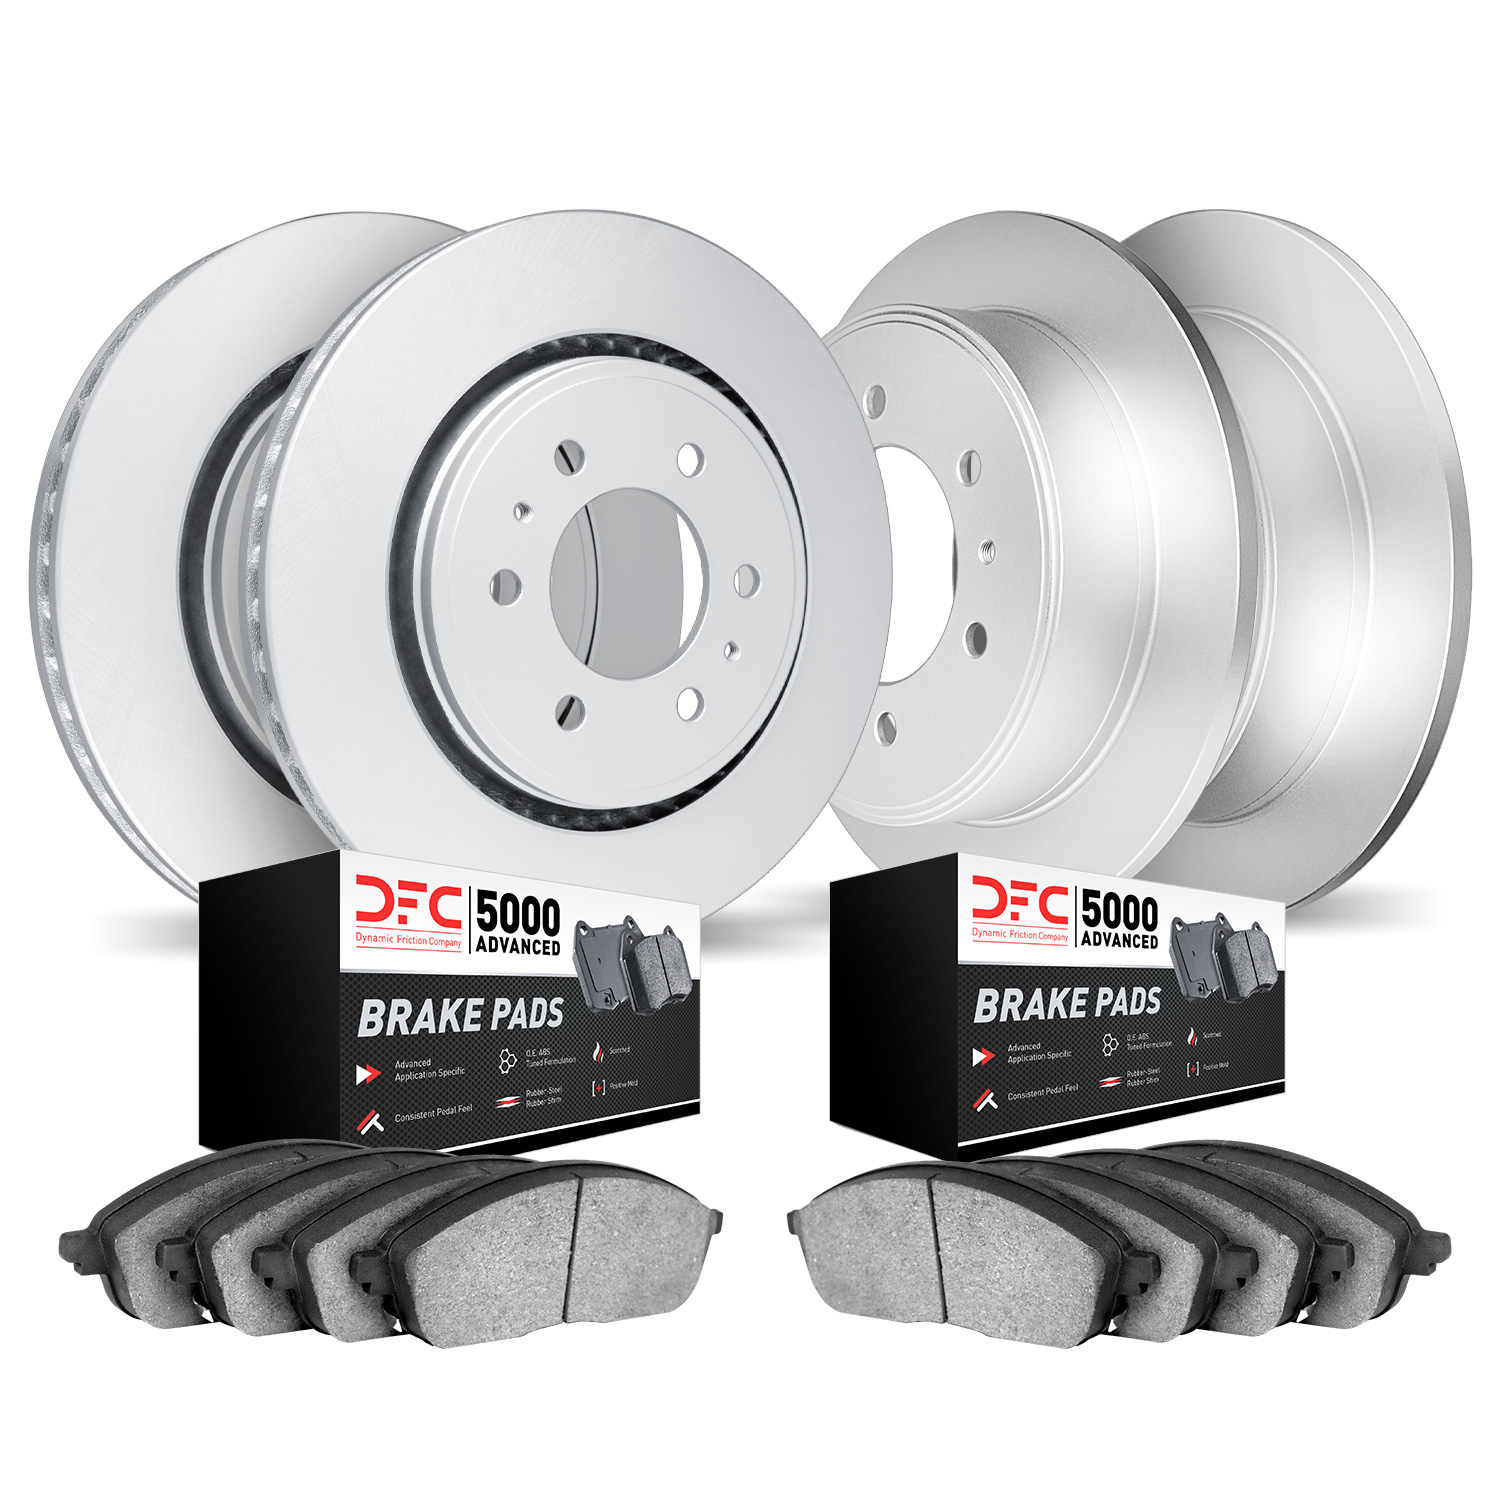 4504-63027 Geospec Brake Rotors w/5000 Advanced Brake Pads Kit, Fits Select Multiple Makes/Models, Position: Front and Rear